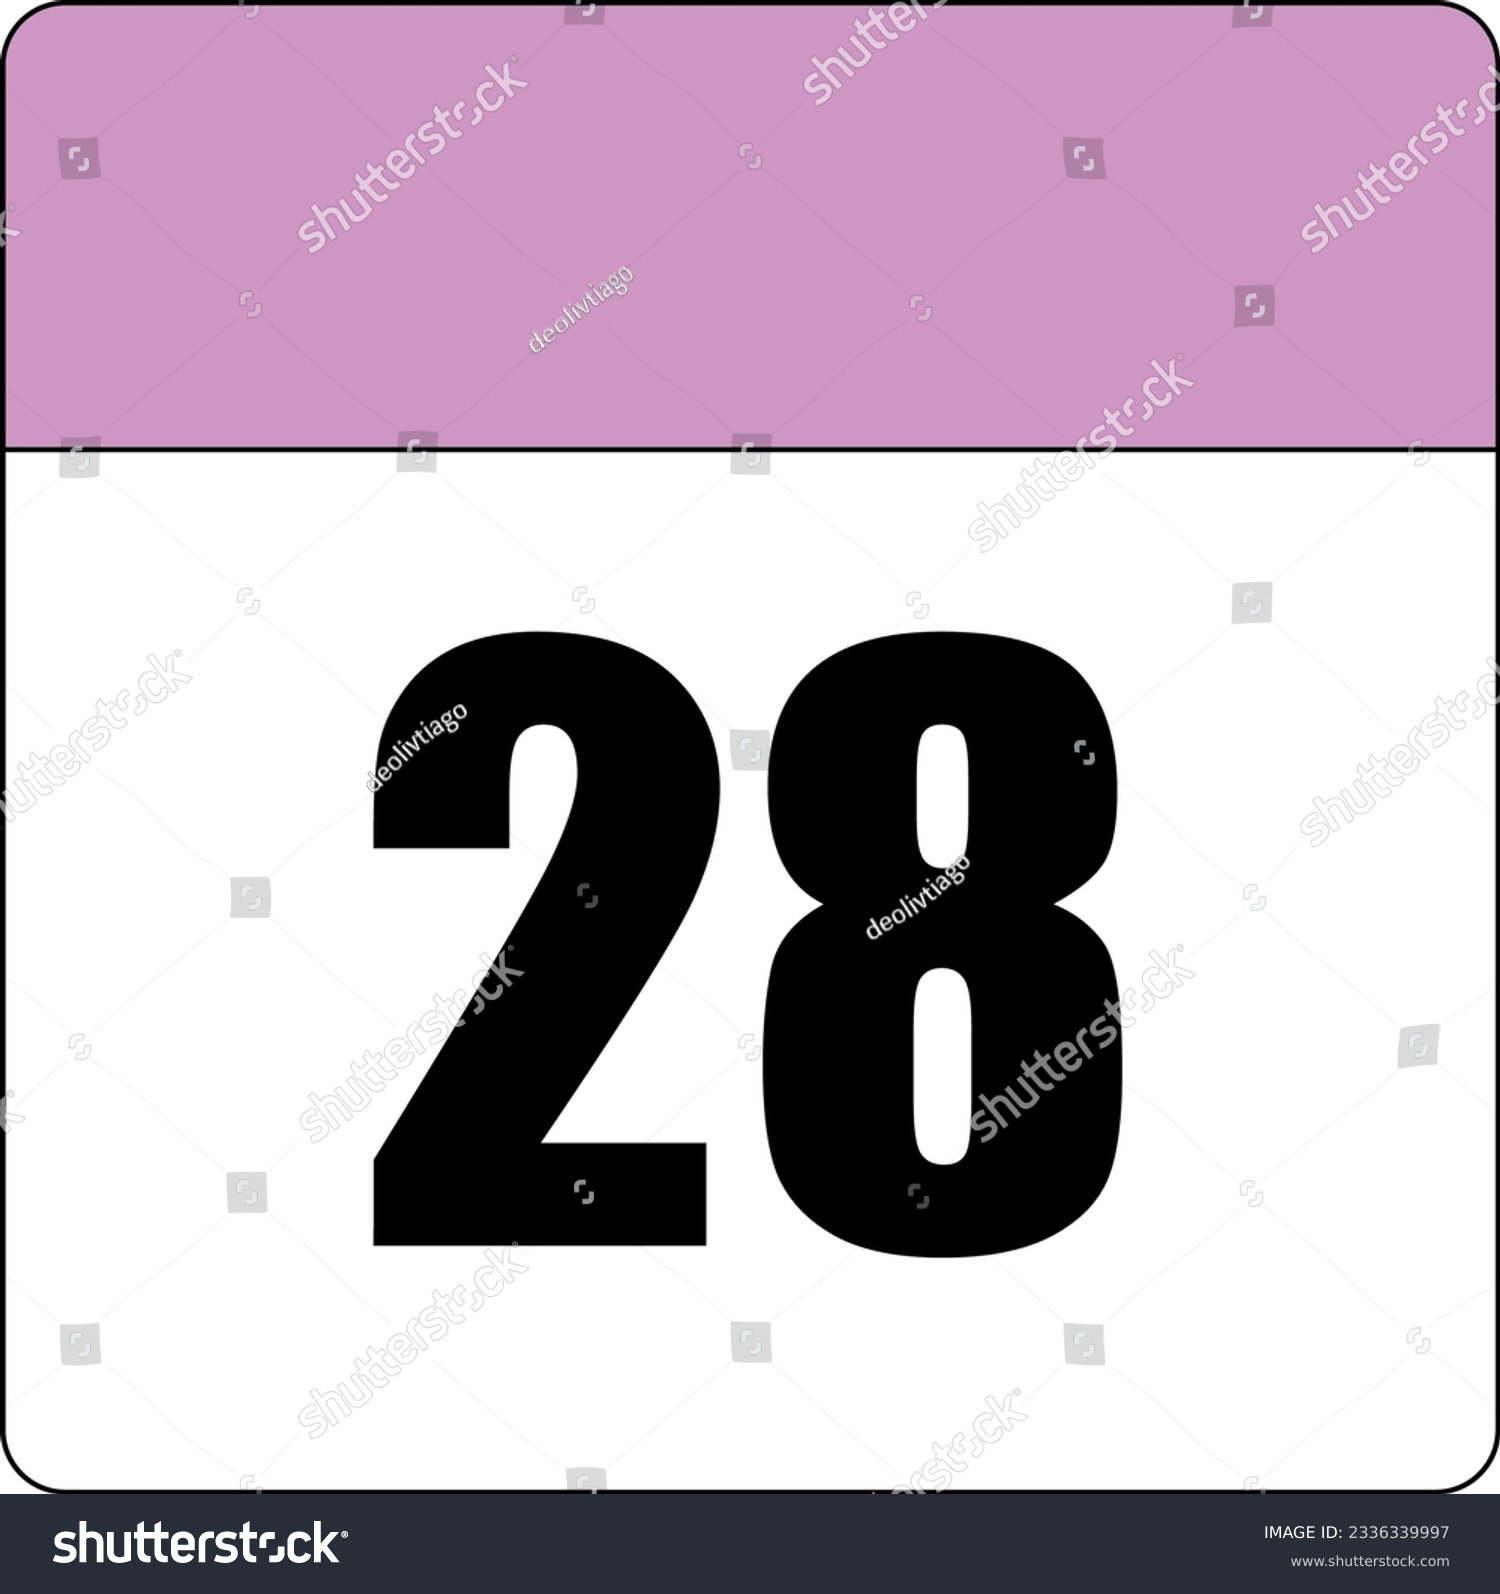 SVG of simple calendar icon with pink header and white background showing 28th day number twenty-eight svg